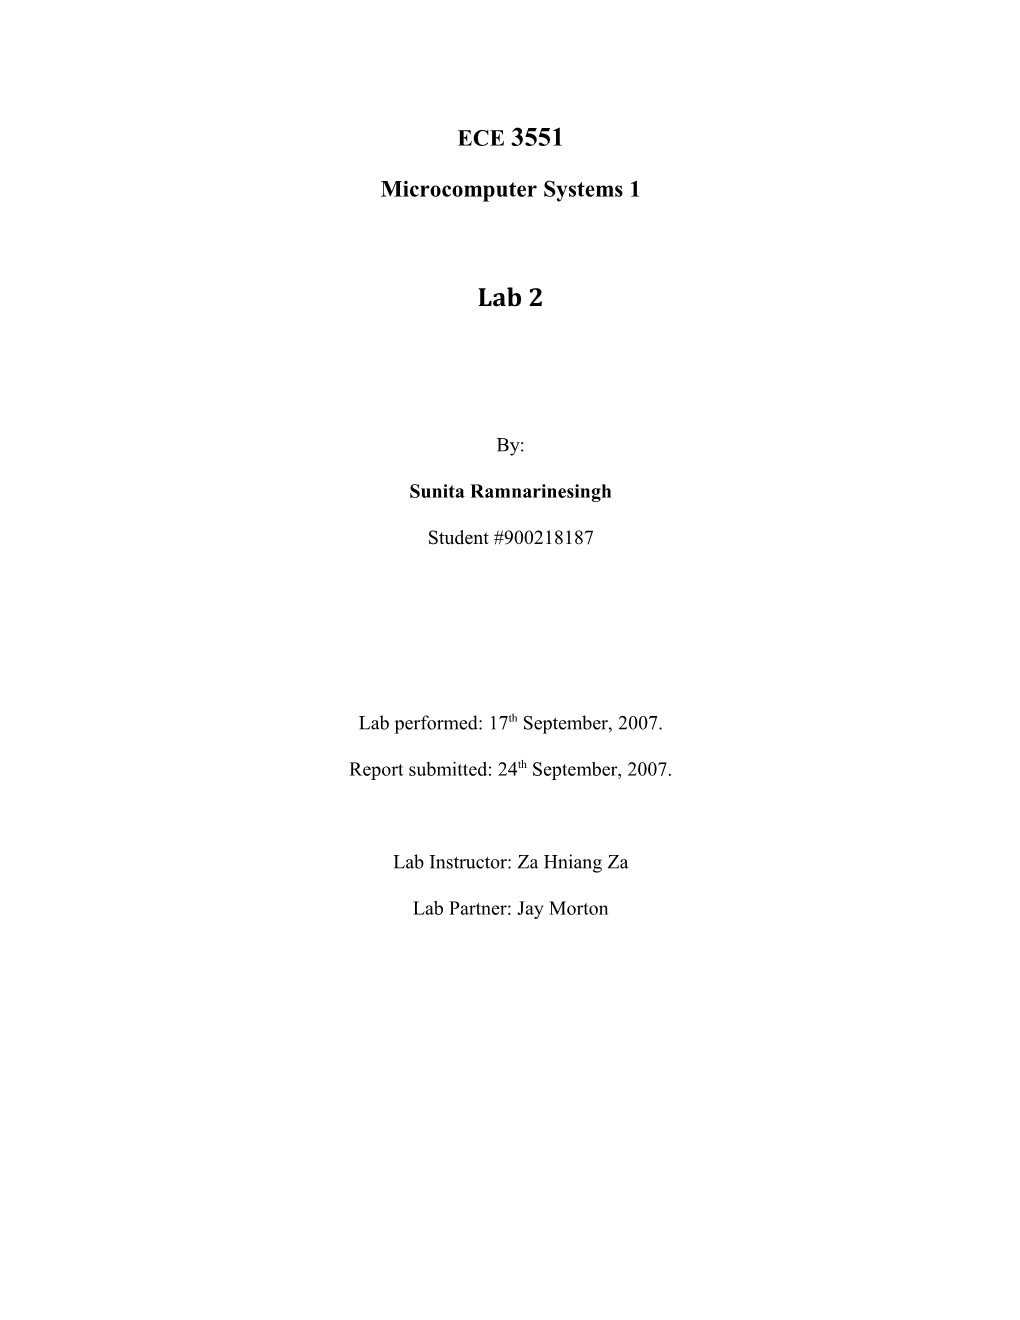 Microcomputer Systems 1